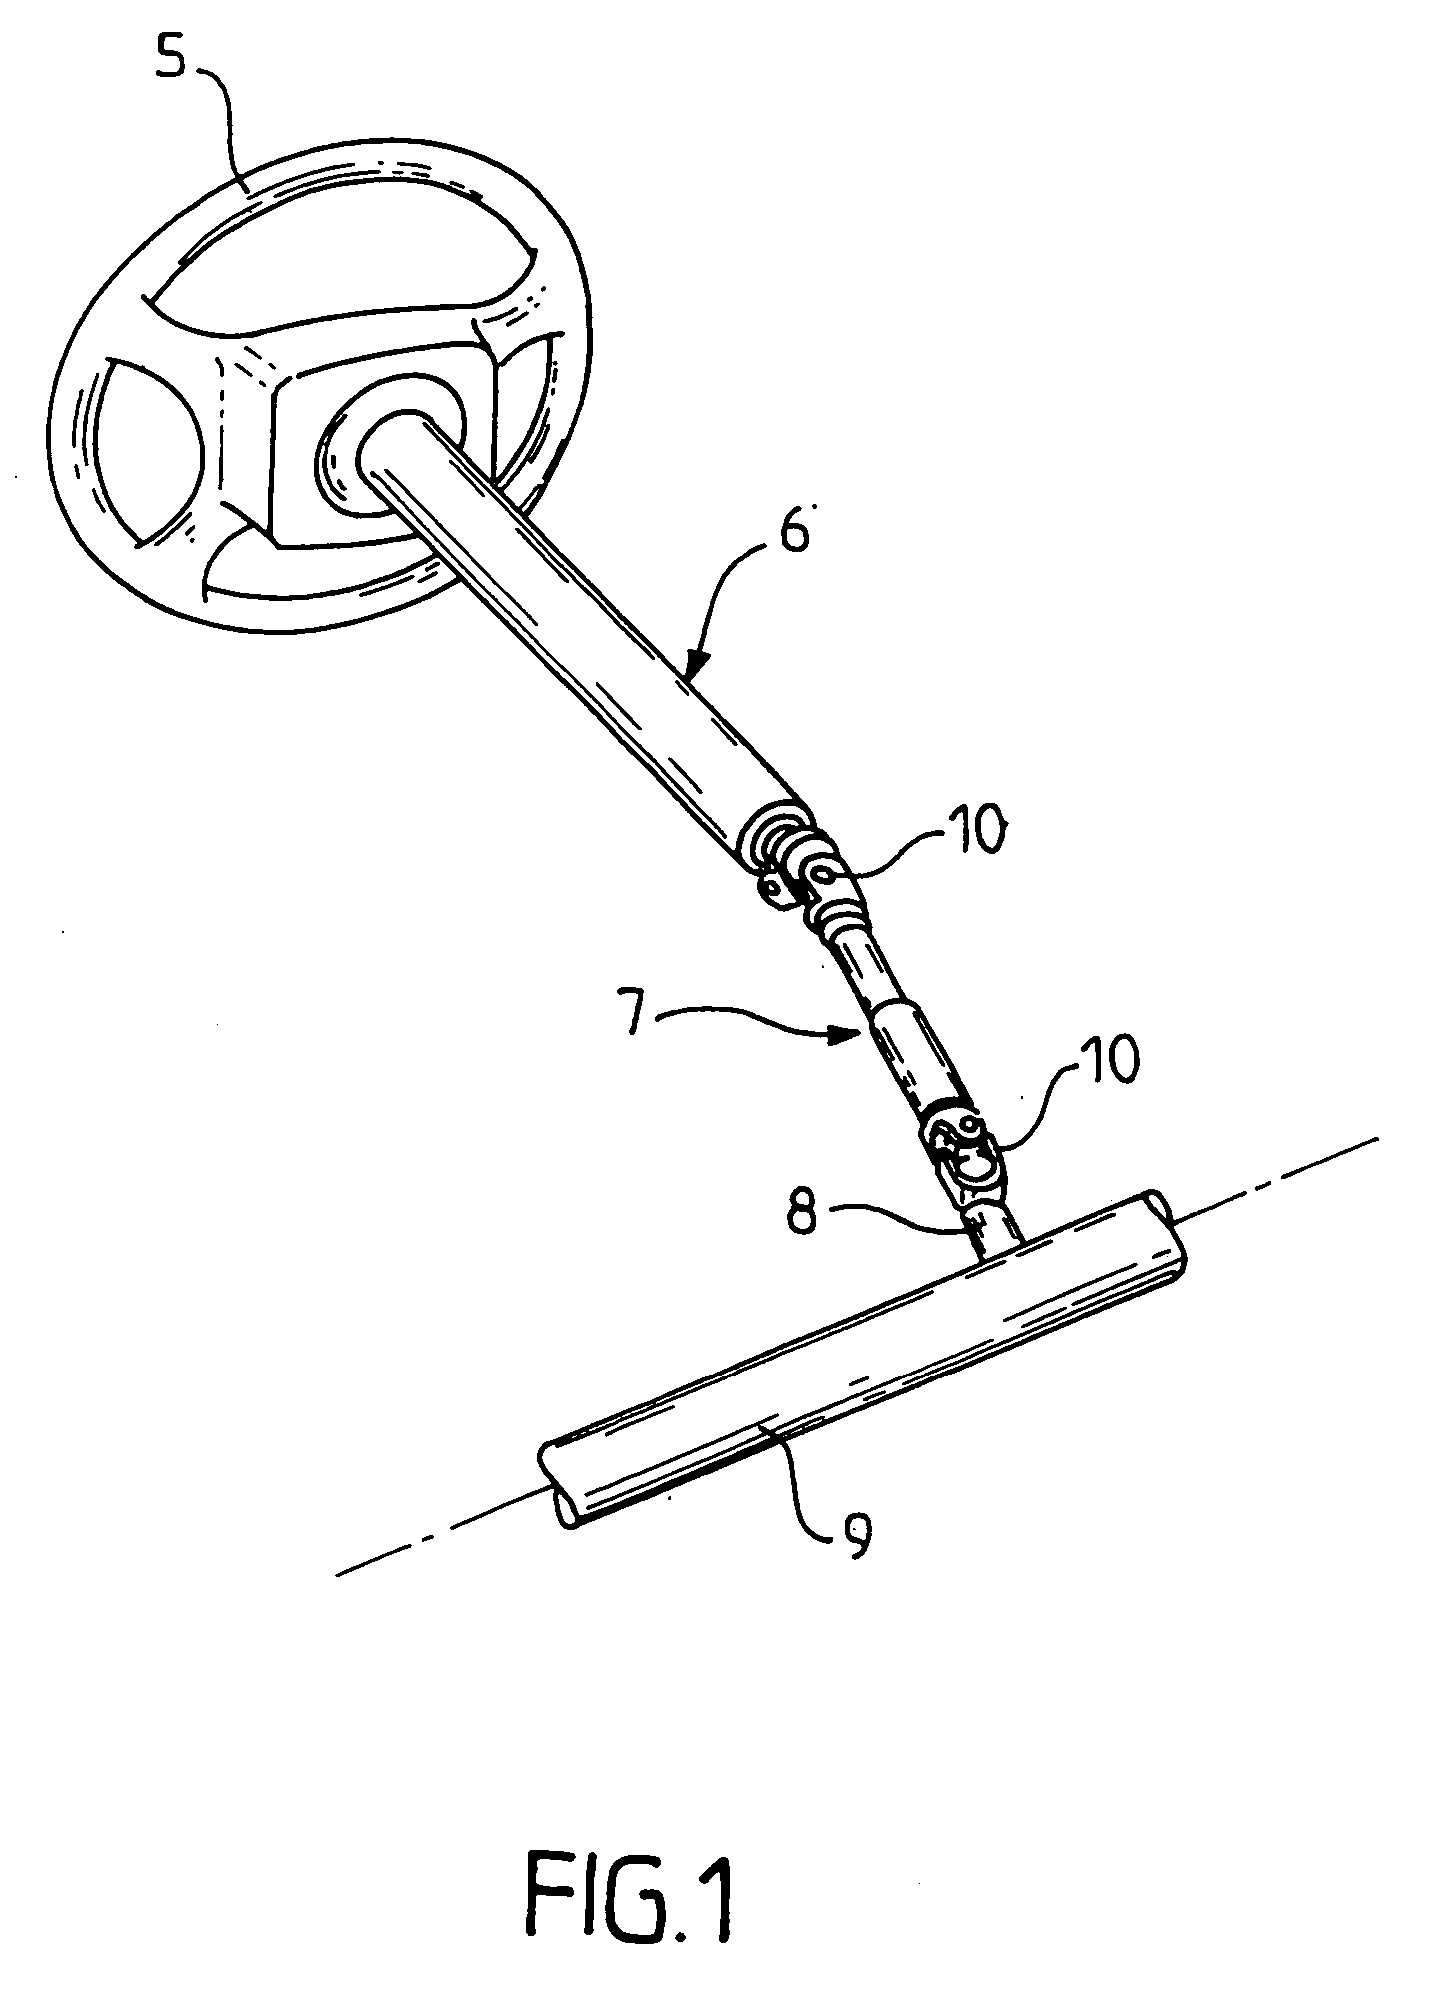 Ball coupling device for keeping two sliding shafts articulated